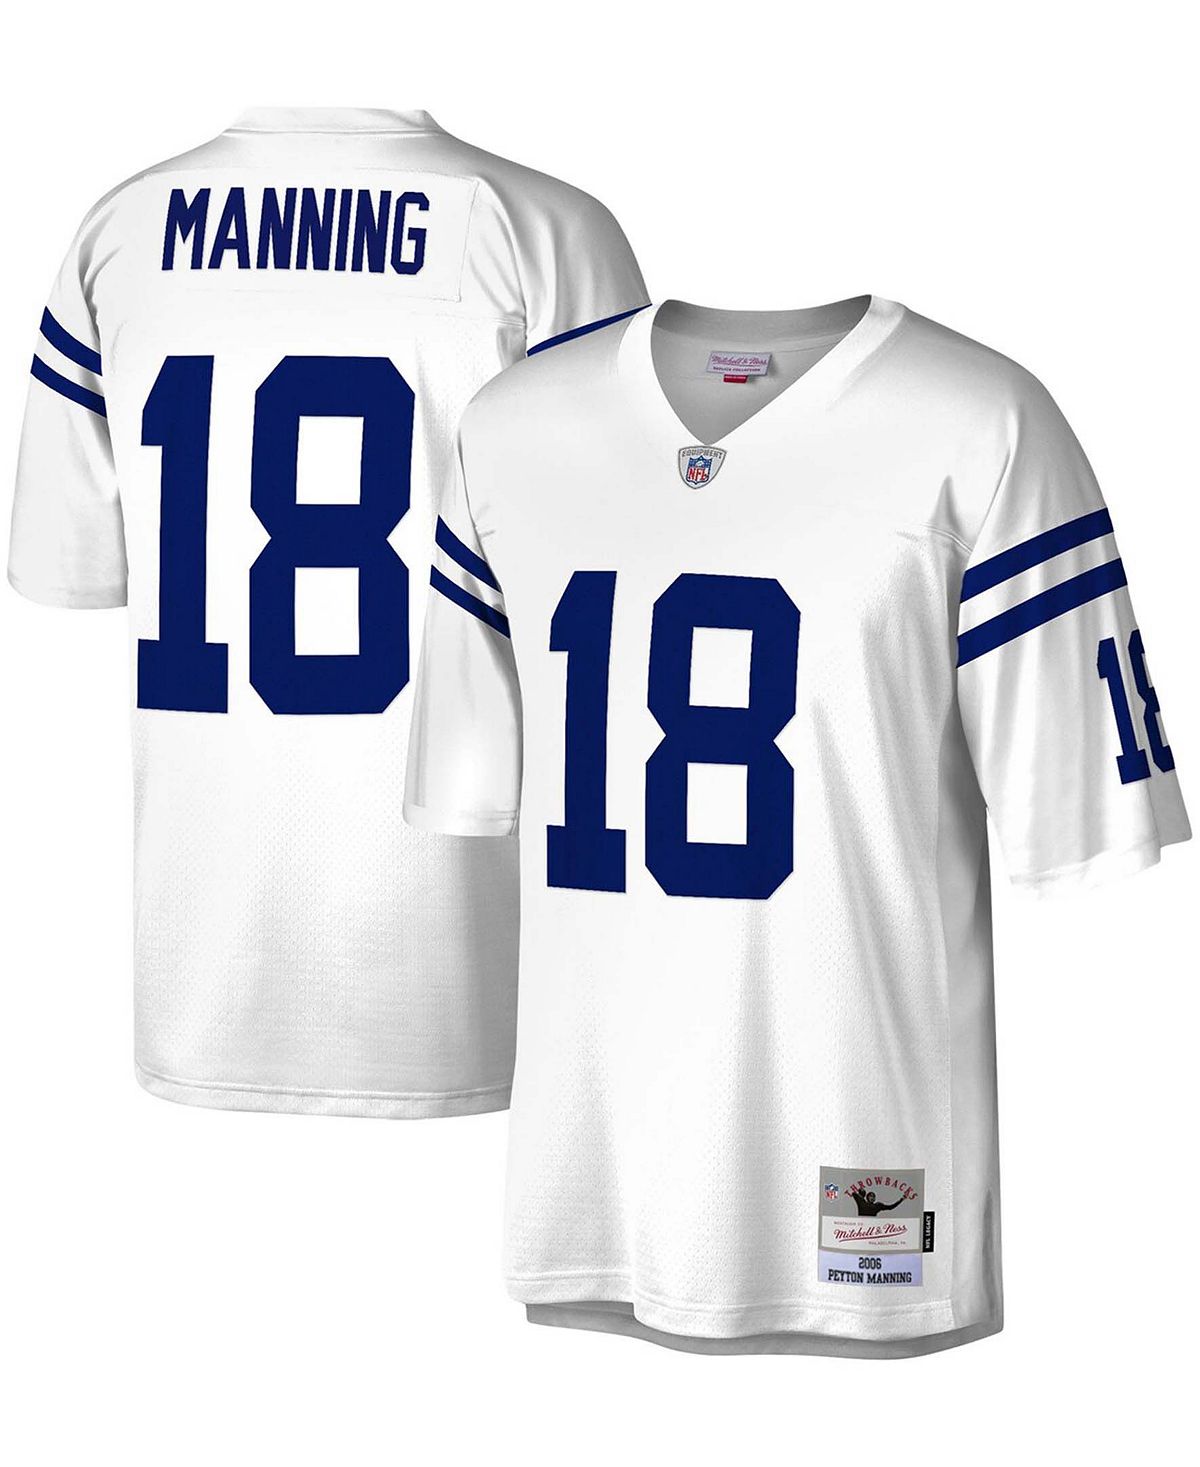 manning m и др artists Футболка Mitchell & Ness Men's Peyton Manning White Indianapolis Colts Legacy, белый